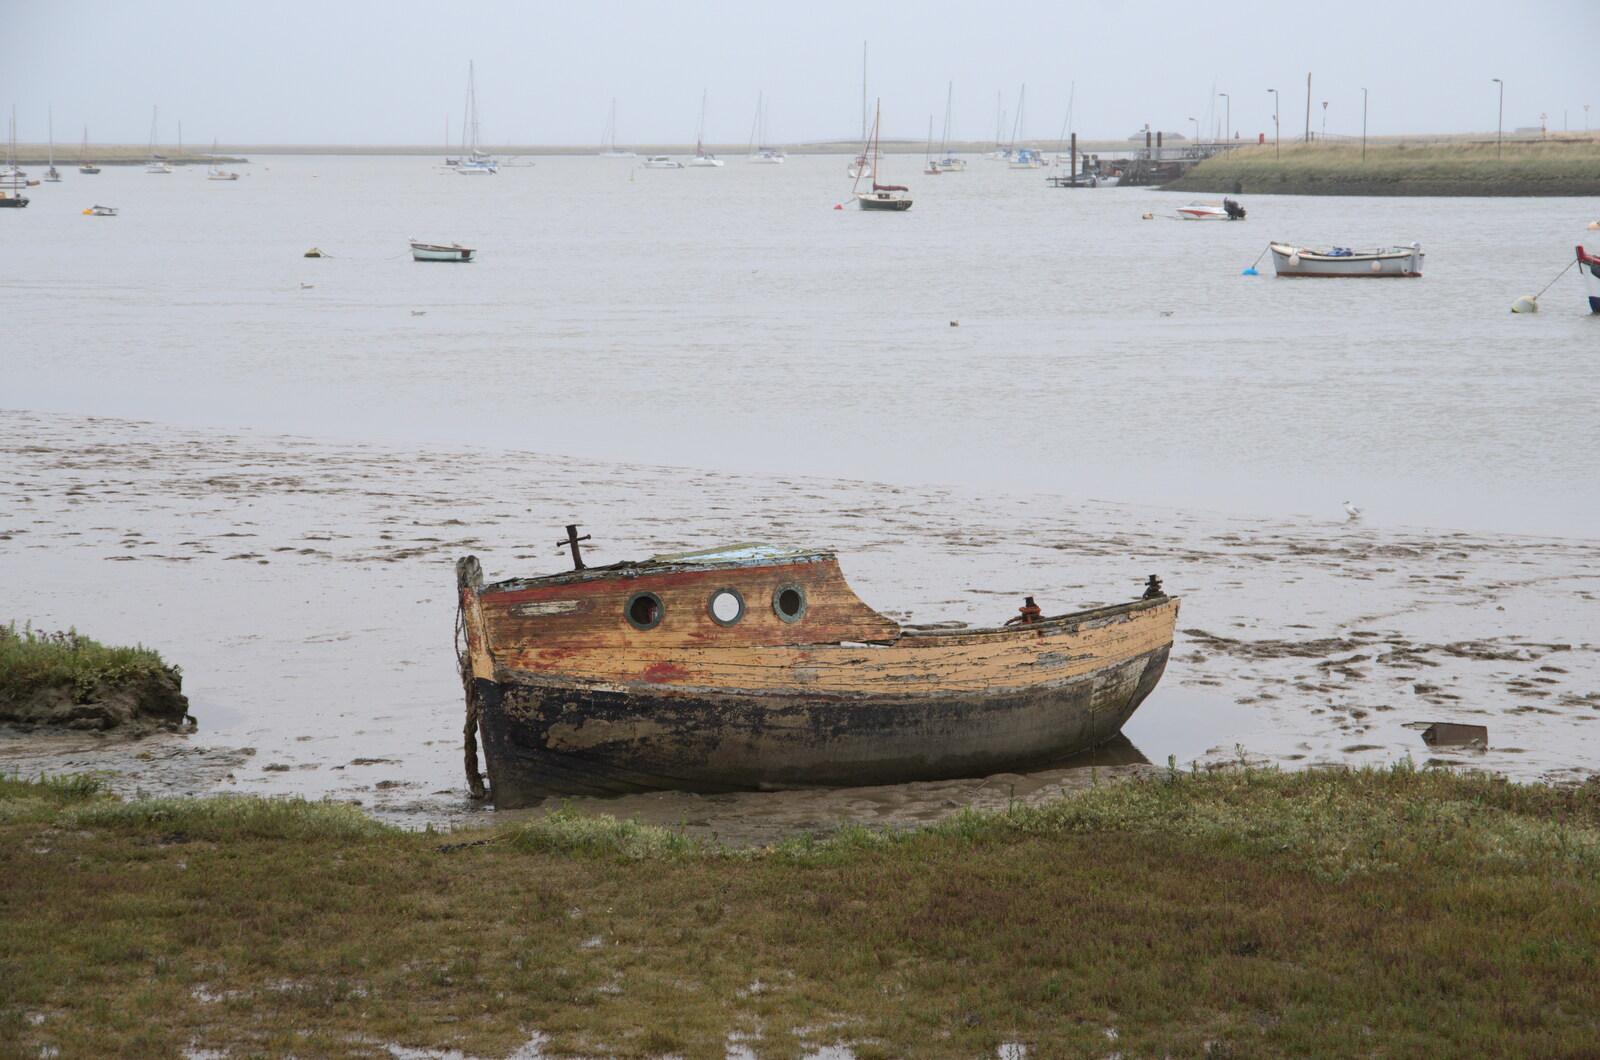 An abandoned boat in the mud from A Trip to Orford, Suffolk - 29th August 2020